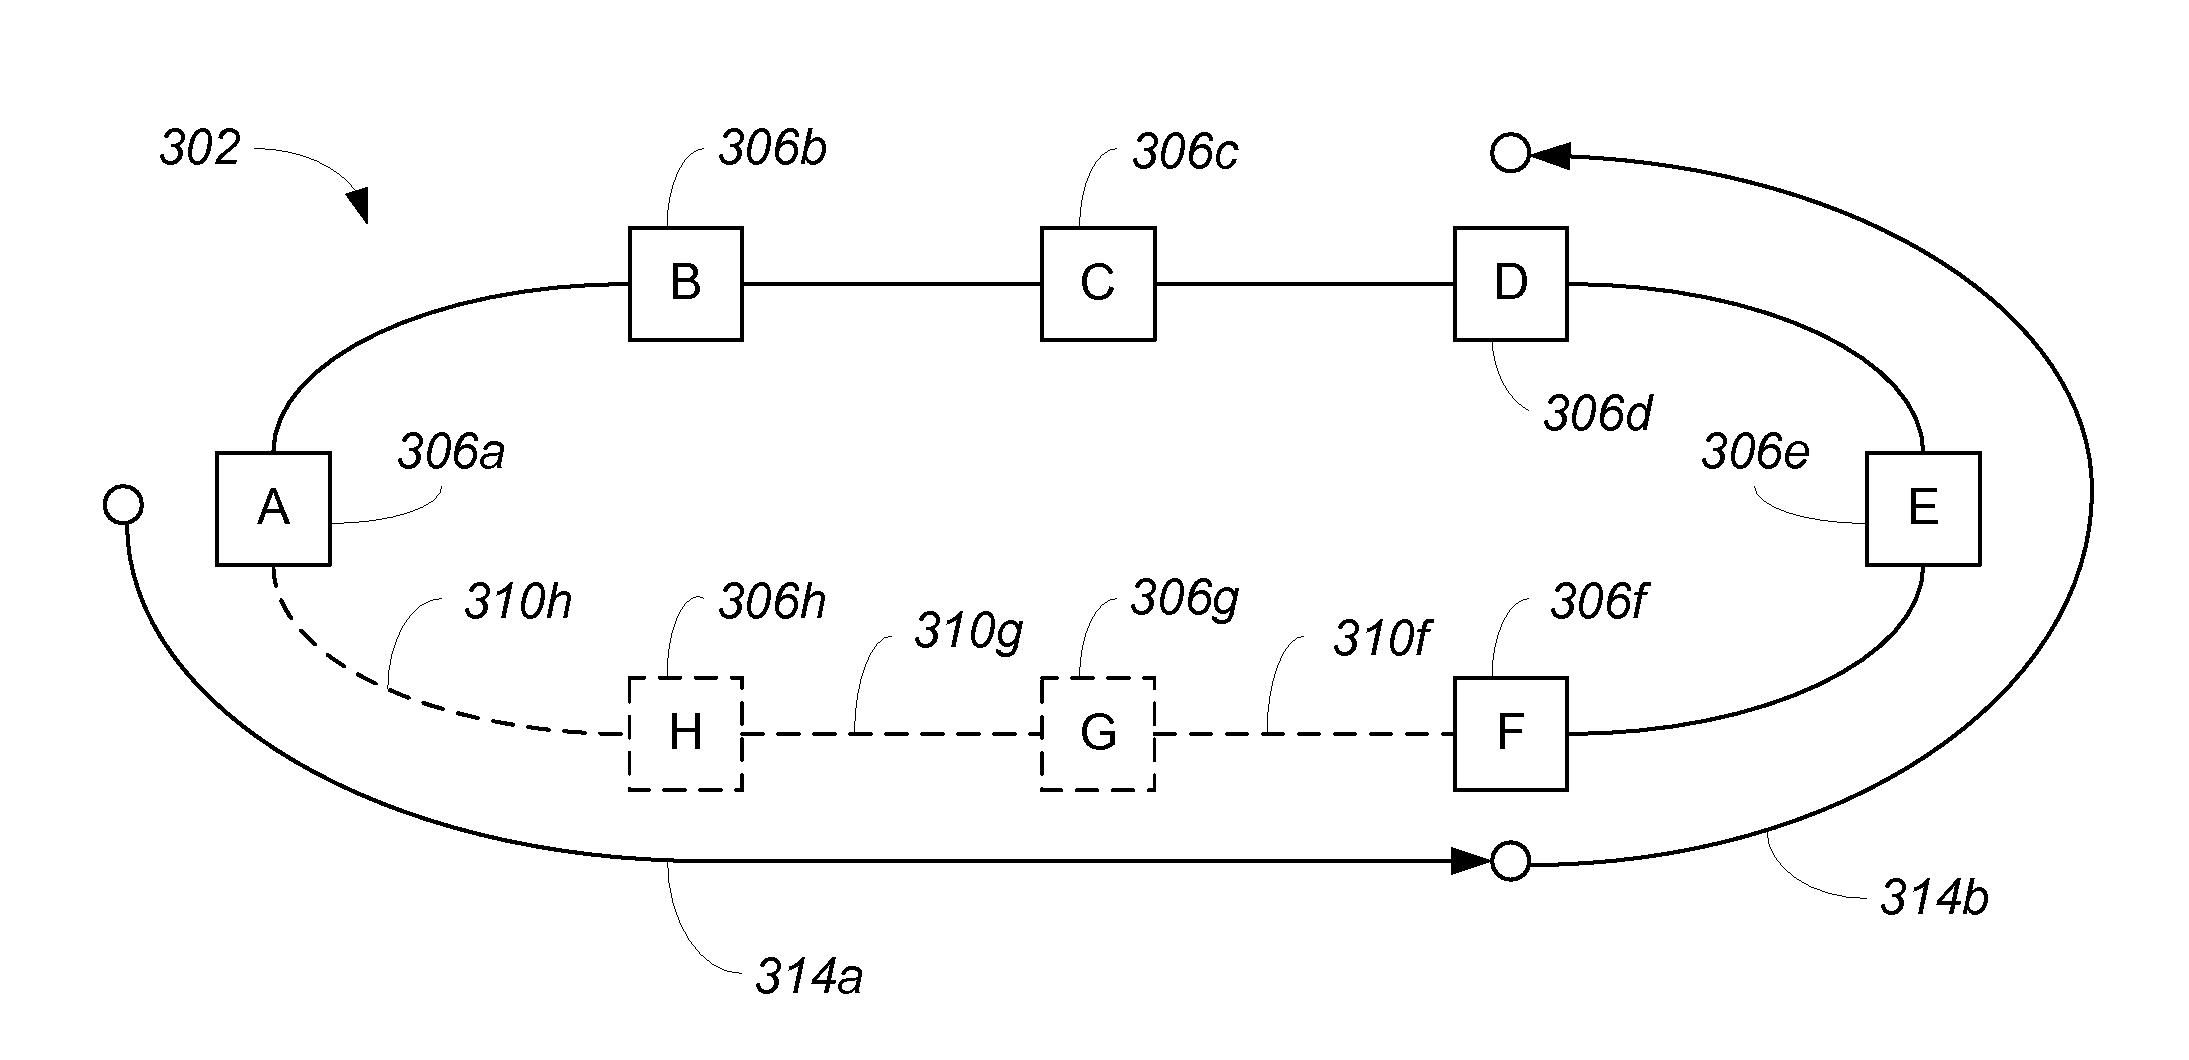 Method and apparatus for computing a path through specified elements in a network